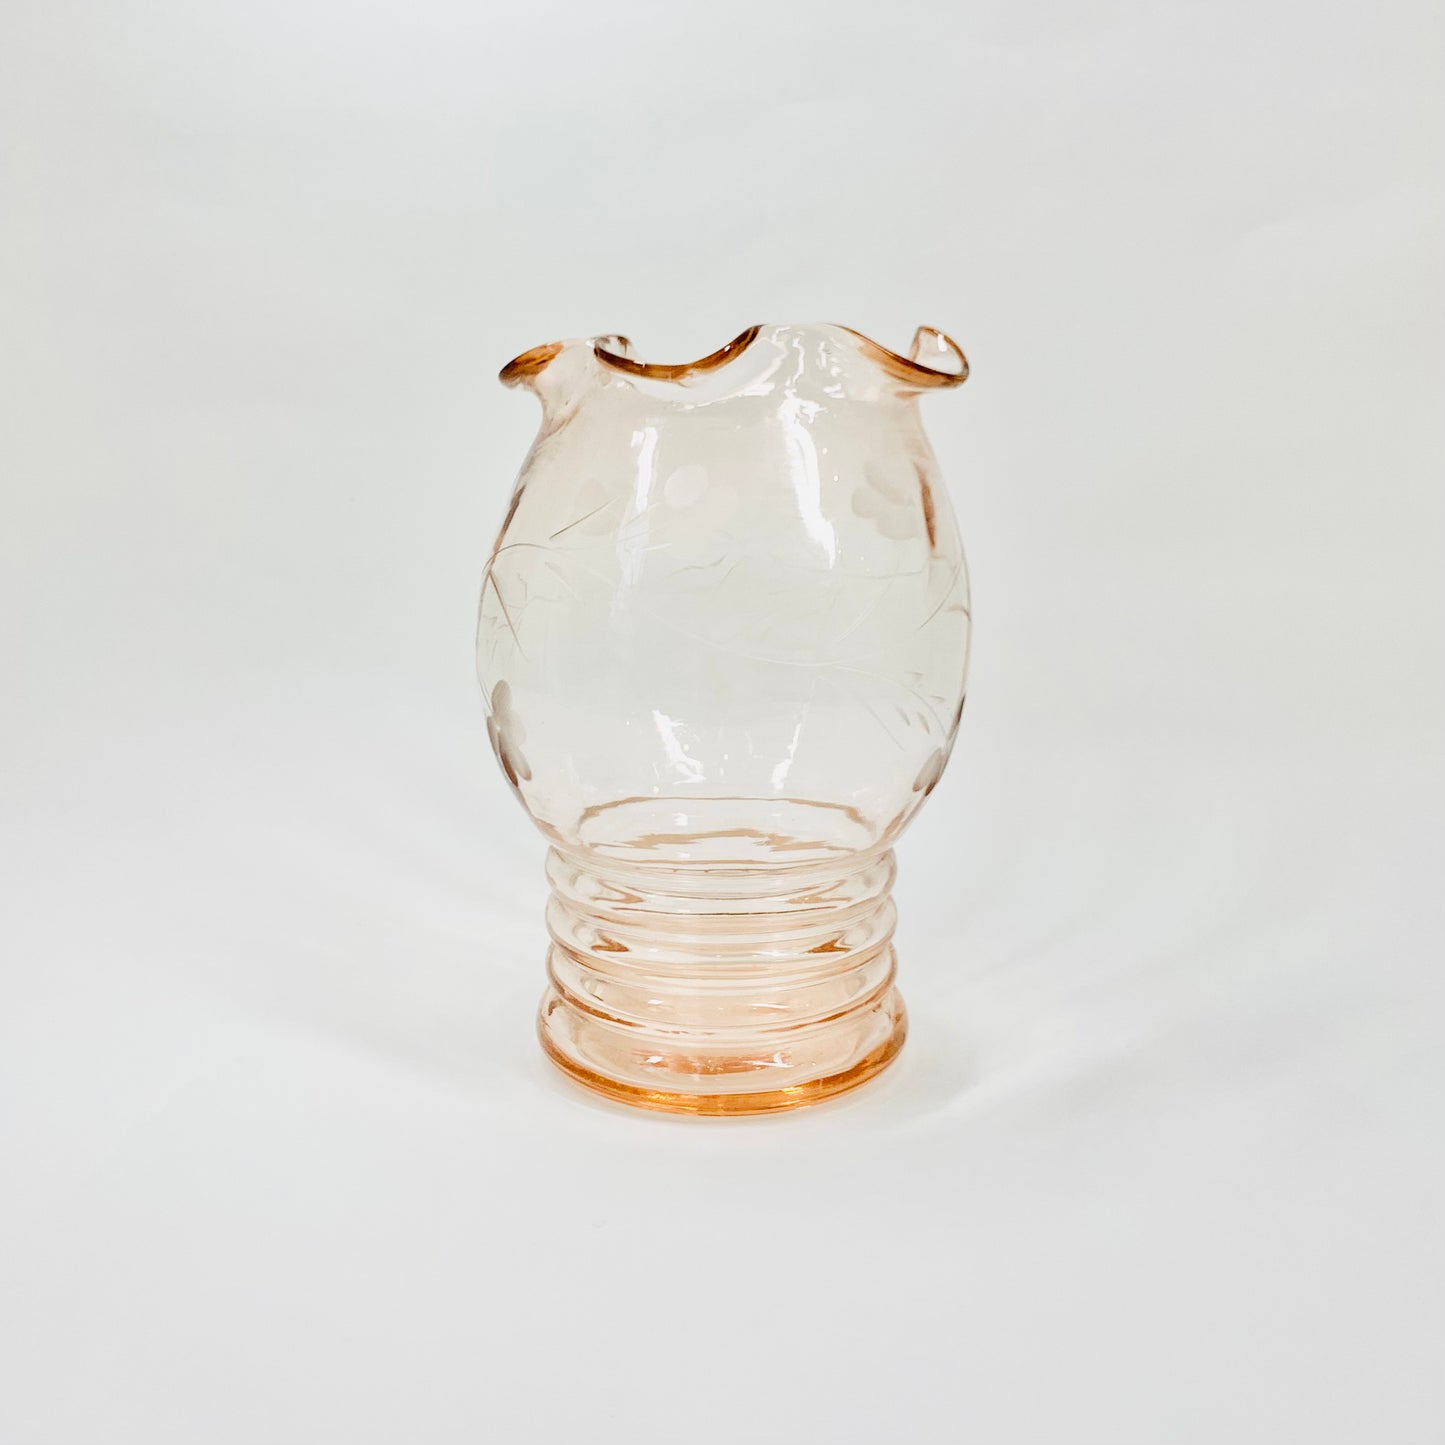 1940s etched pink glass vase with ruffle rim